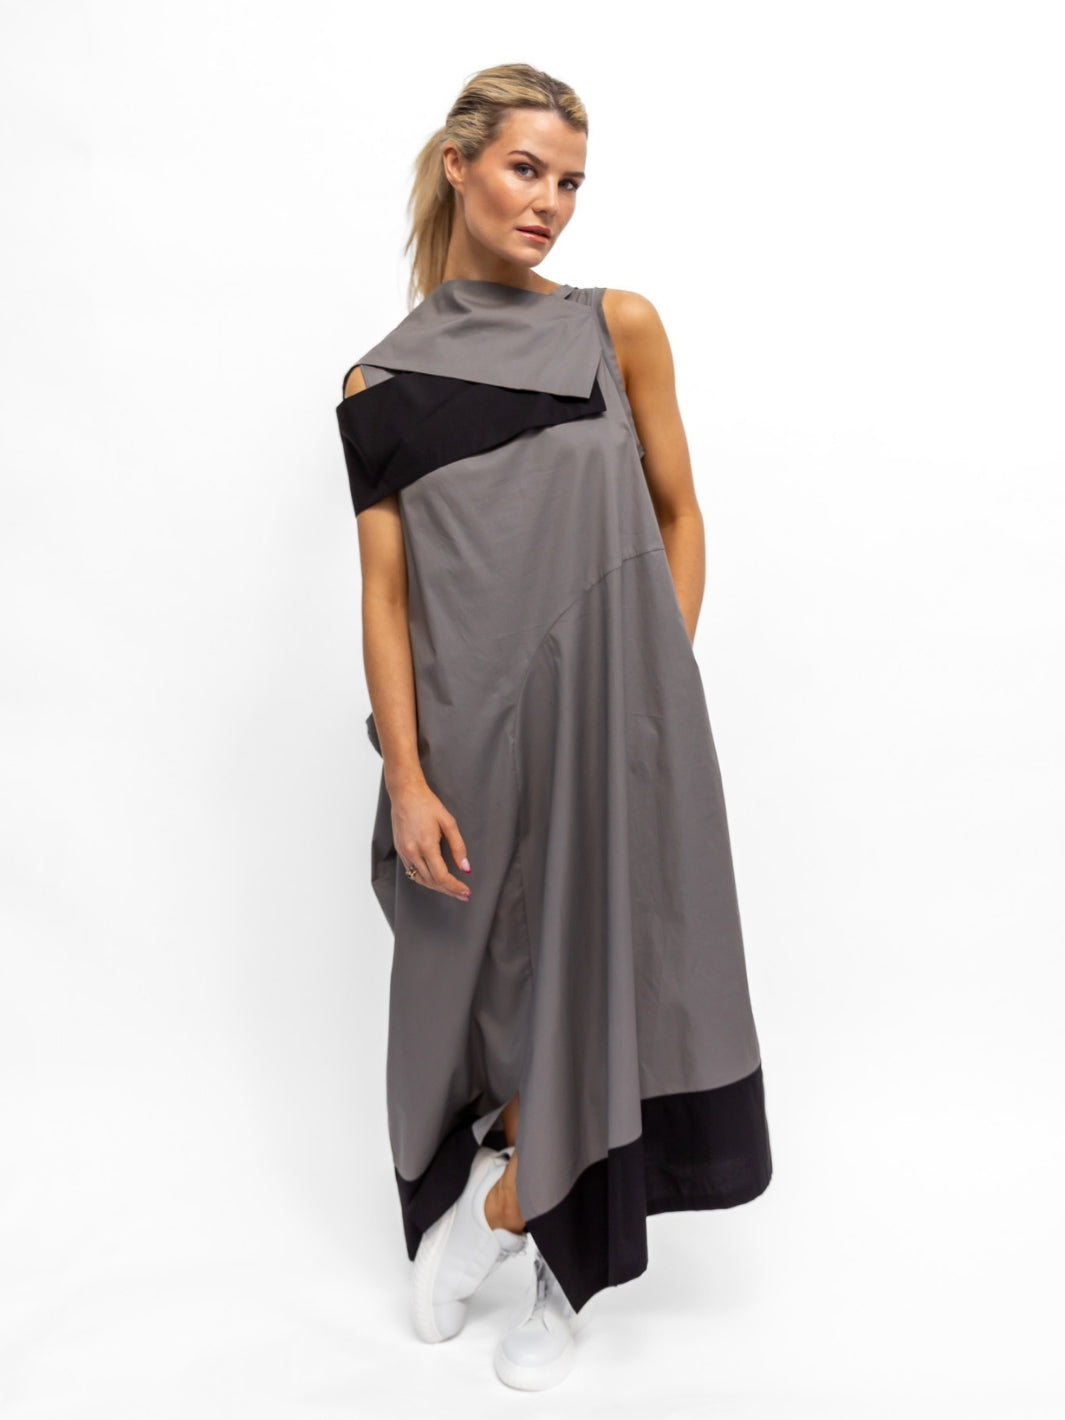 Xenia Design Dress Xenia ELAN Dress in Soft Taupe and Black